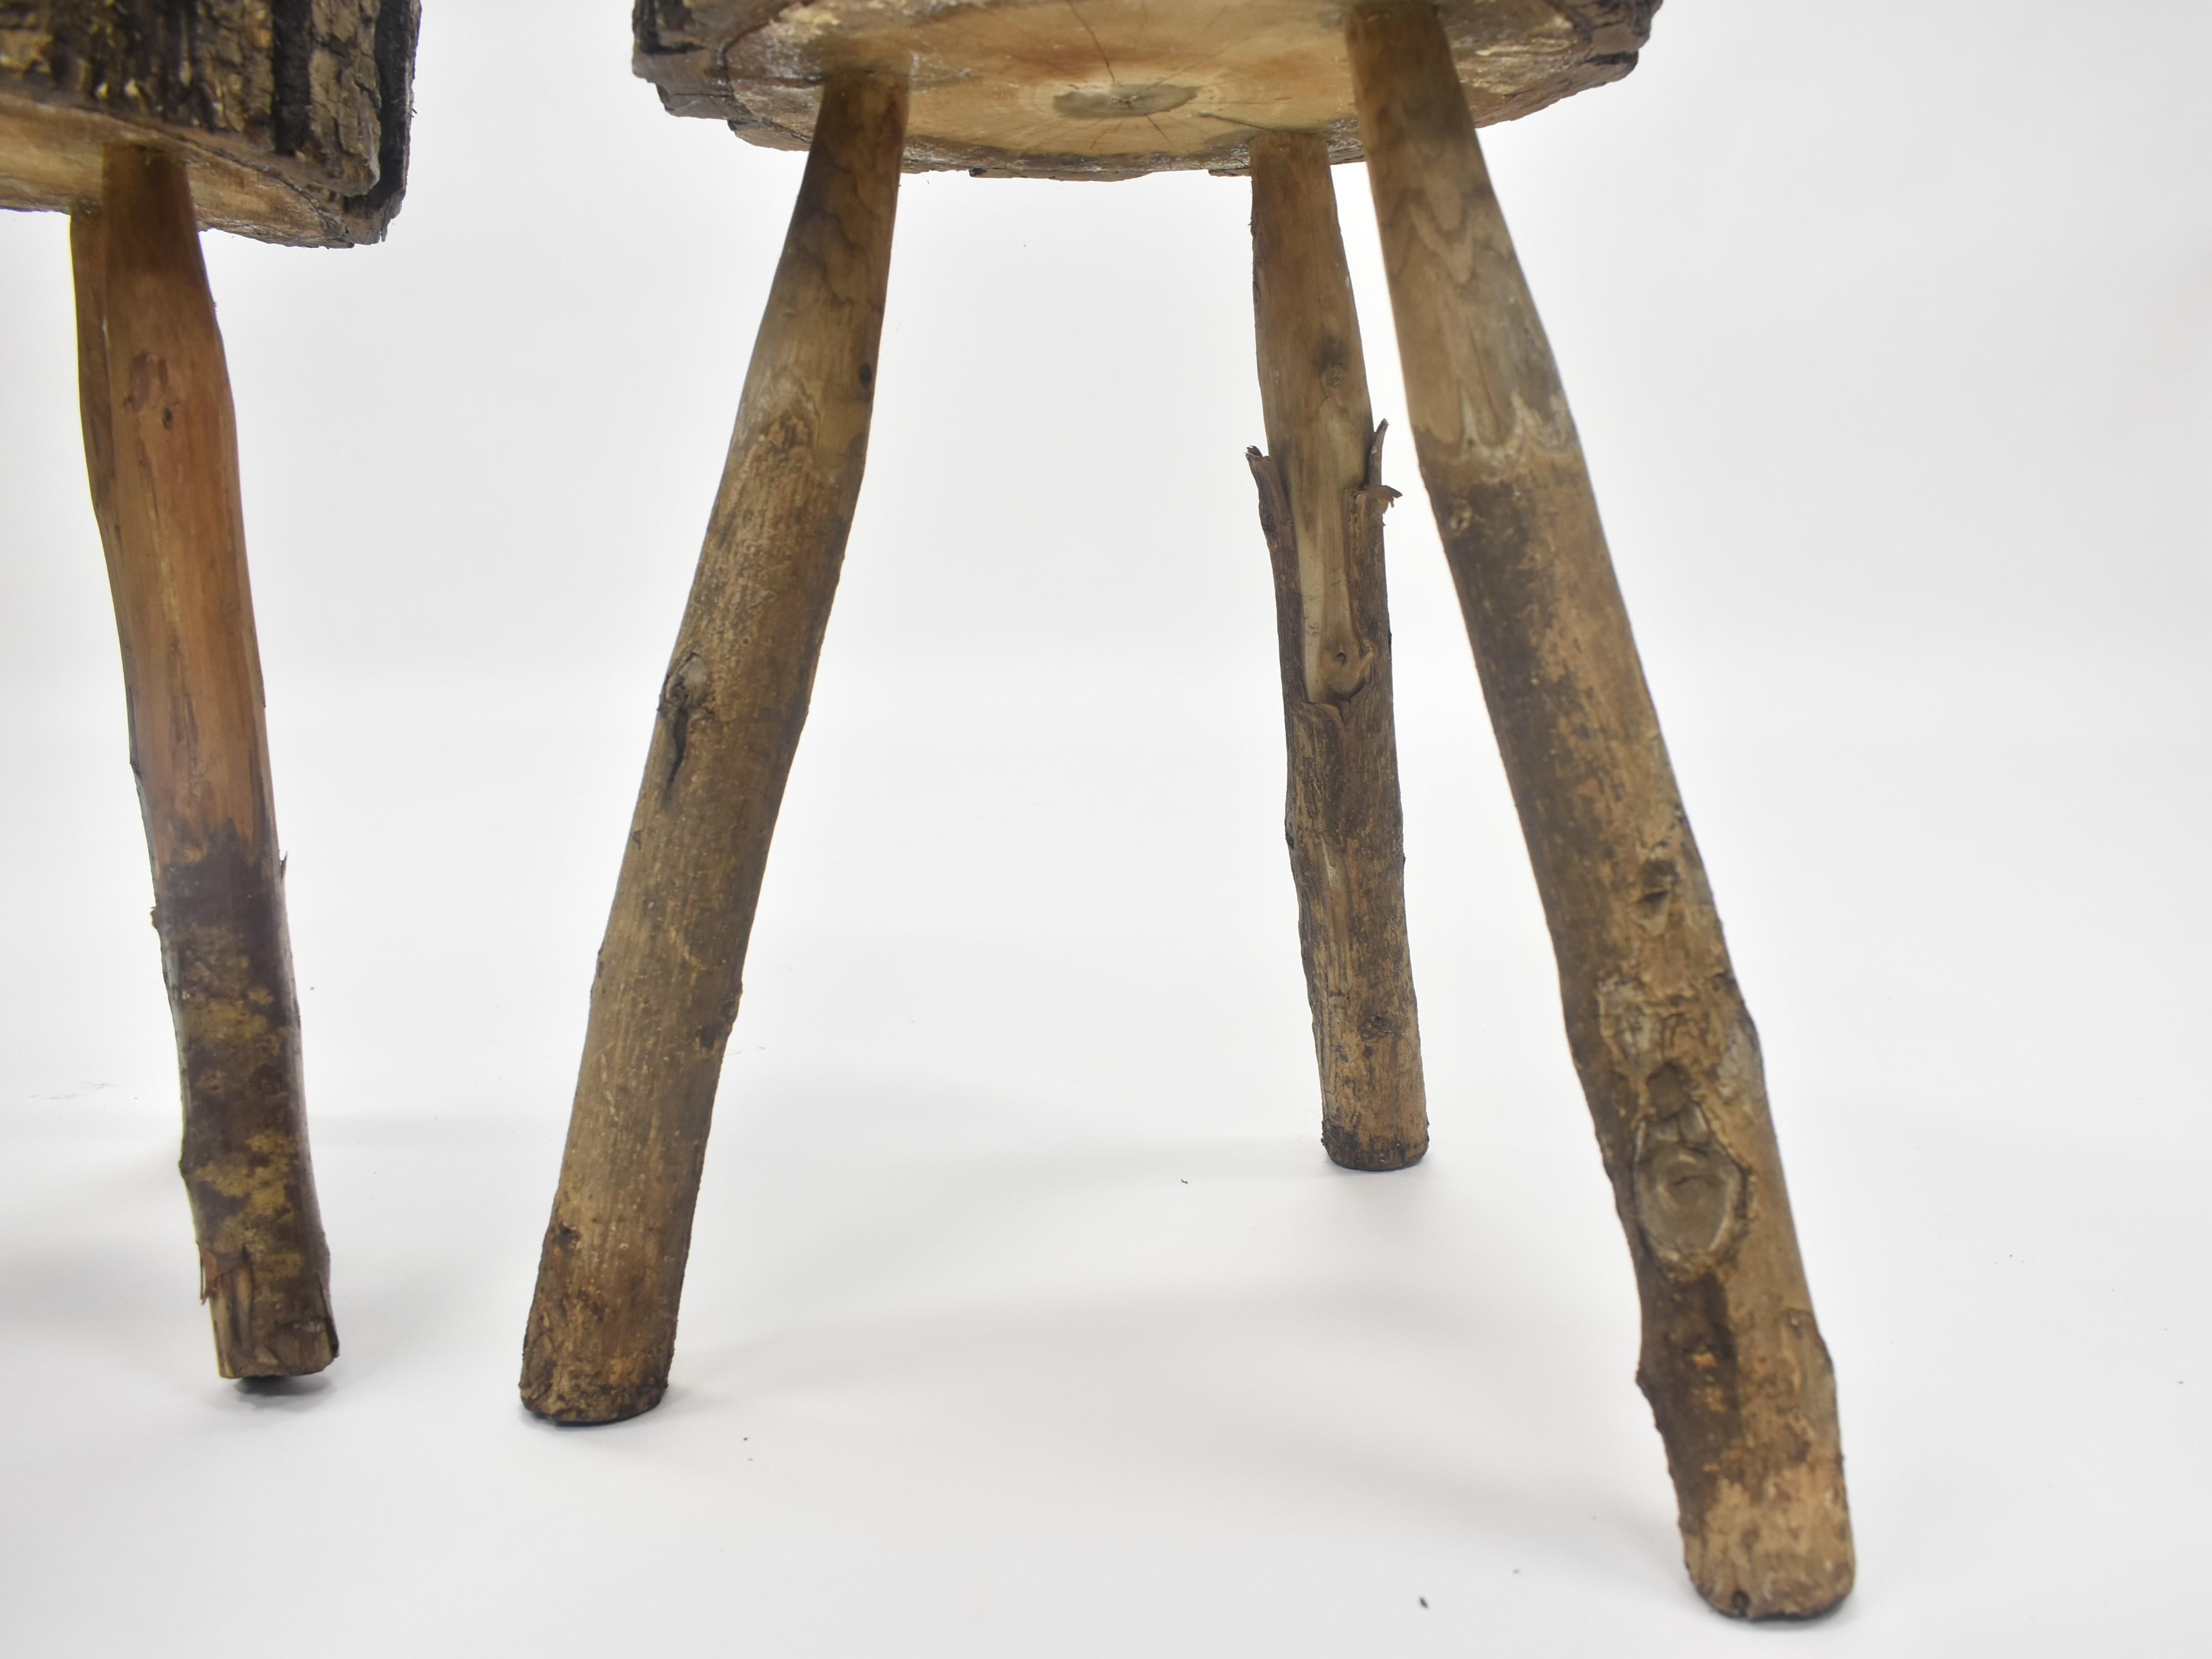 Folk art side tables crafted from tree trunk pieces. The small diameter makes for a perfect cocktail table. Sold separately.